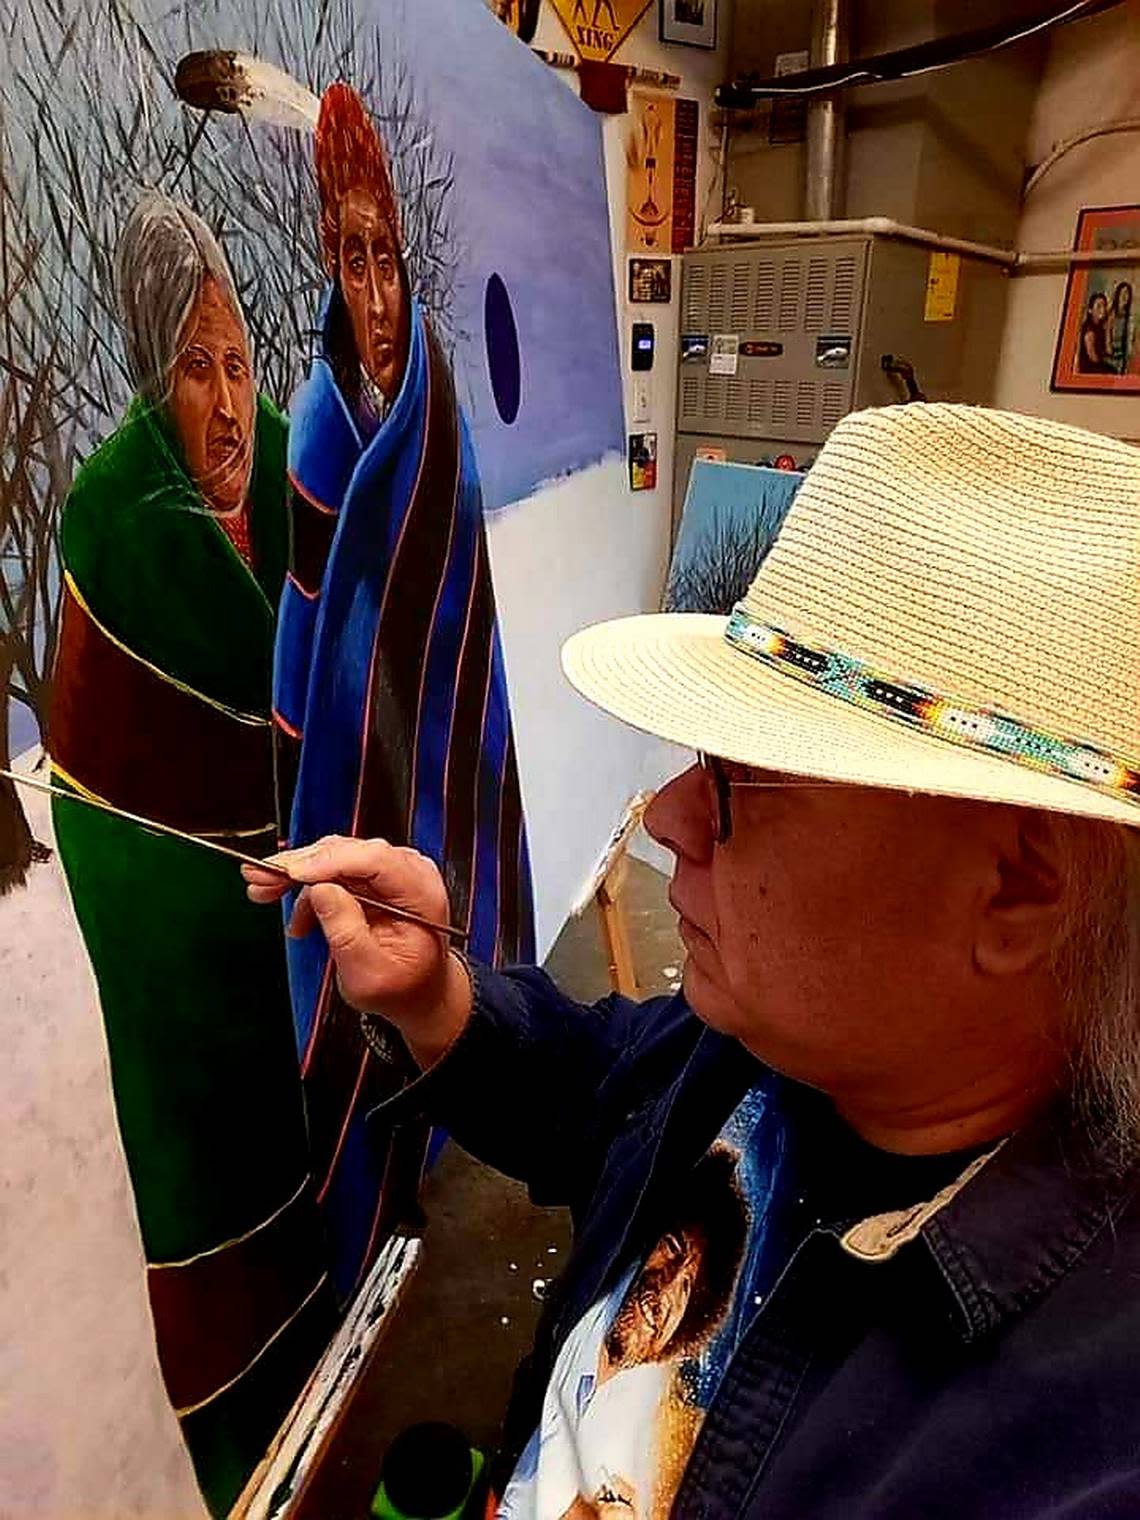 Well-known Muscogee (Creek) artist Johnnie Diacon is traveling from Oklahoma to Macon to show his work and do a live painting during Saturday and Sunday’s Ocmulgee Mounds National Historical Park Indigenous Celebration. The painting will become part of the collection at Ocmulgee Mounds.